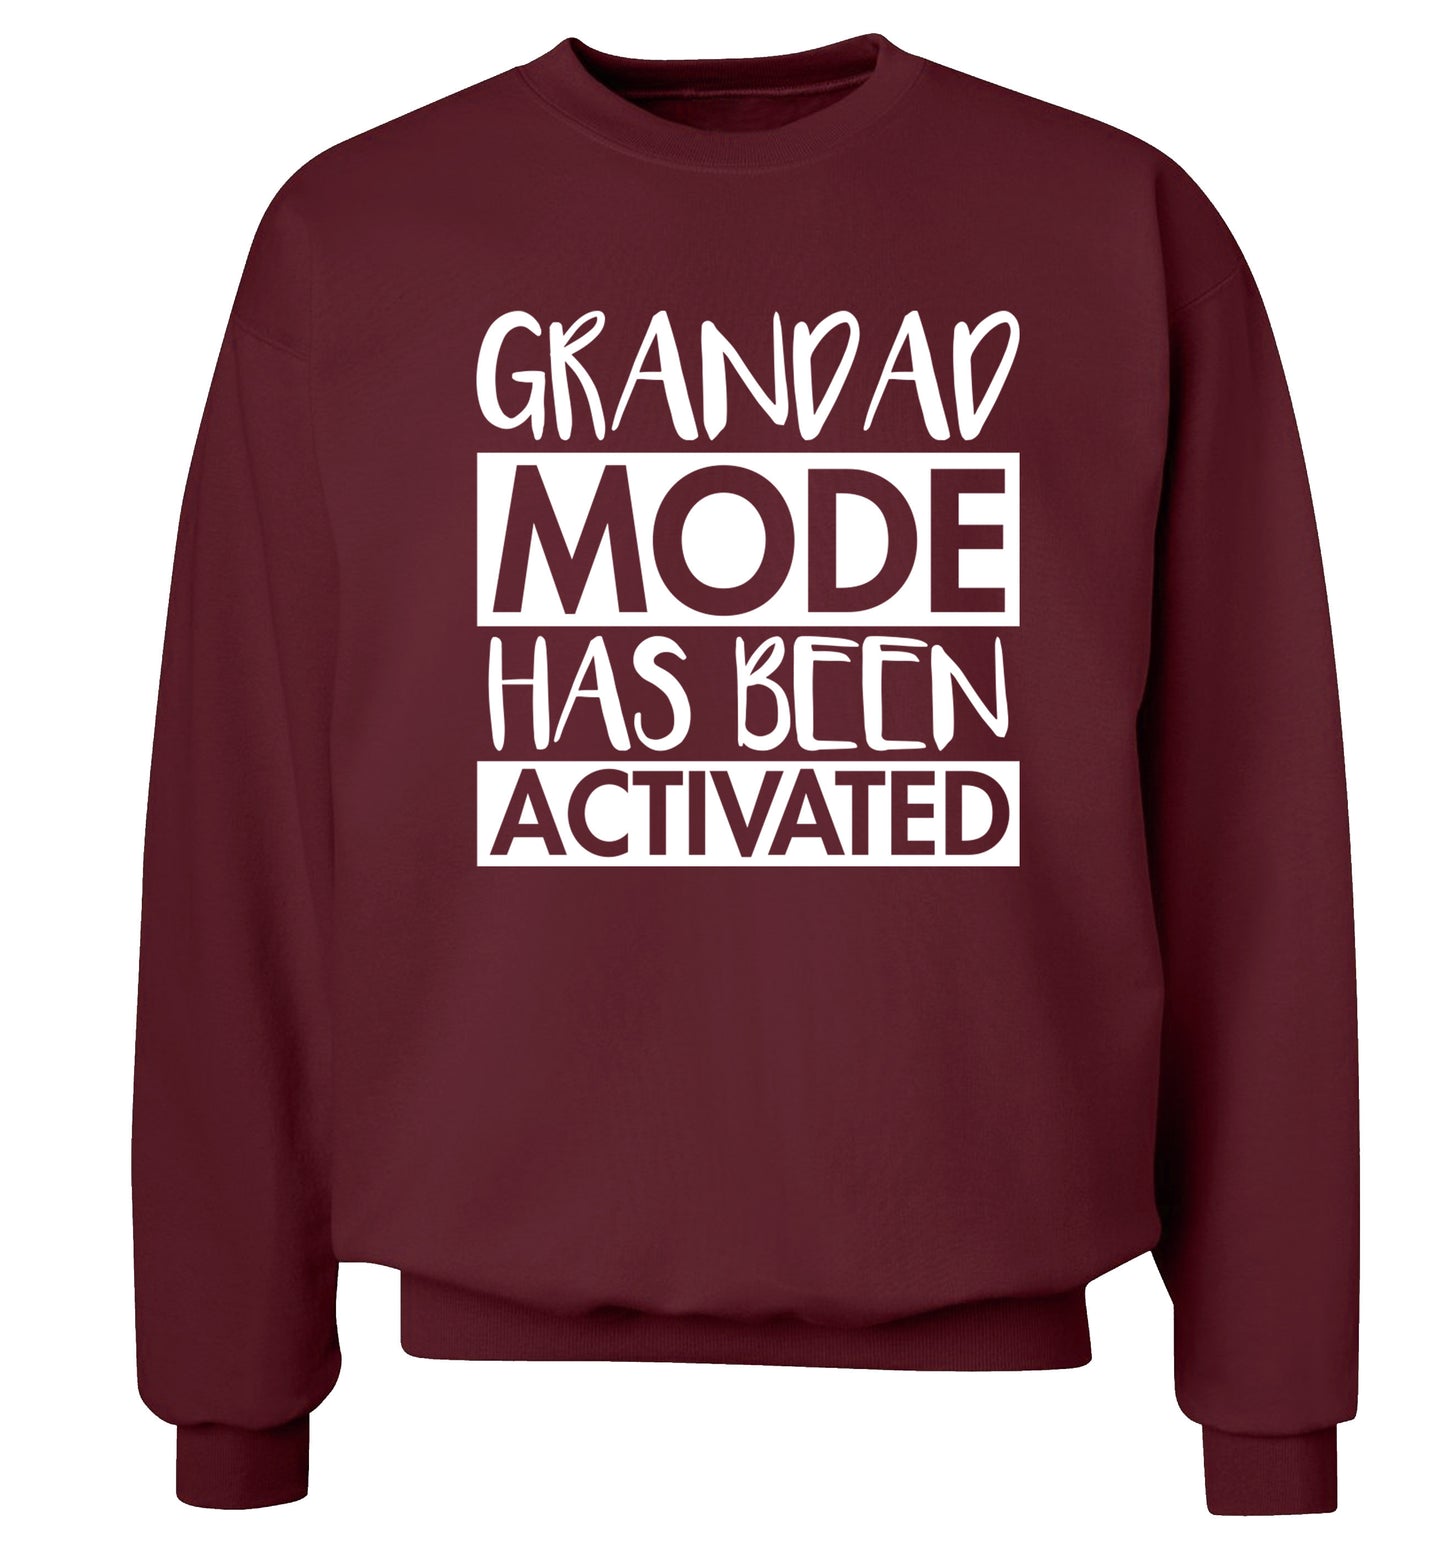 Grandad mode activated Adult's unisex maroon Sweater 2XL